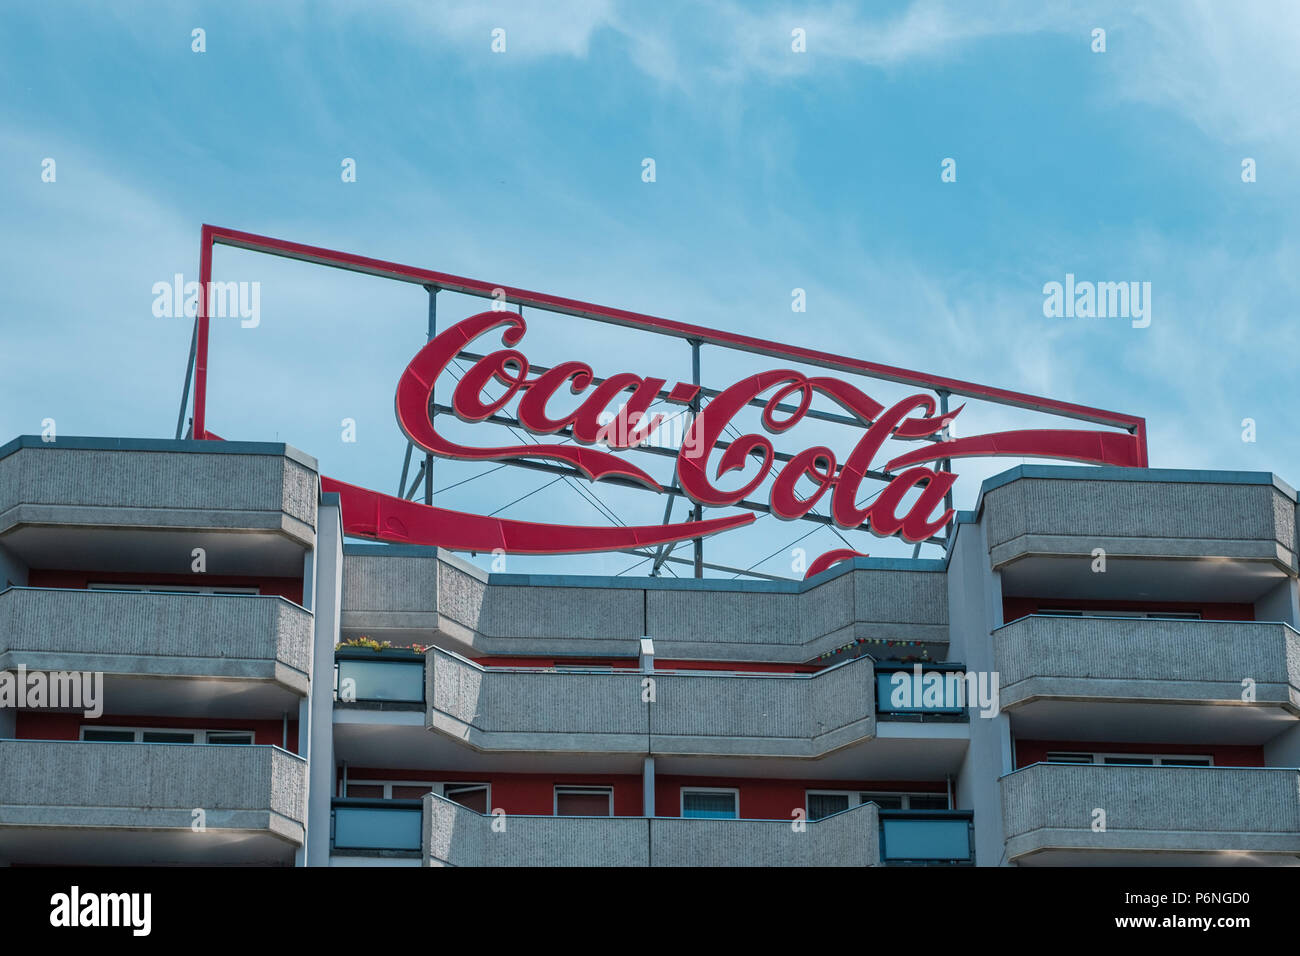 Berlin, Germany - june 2018: The Coca Cola logo advertising neon light letters on building  roof in Berlin, Germany Stock Photo